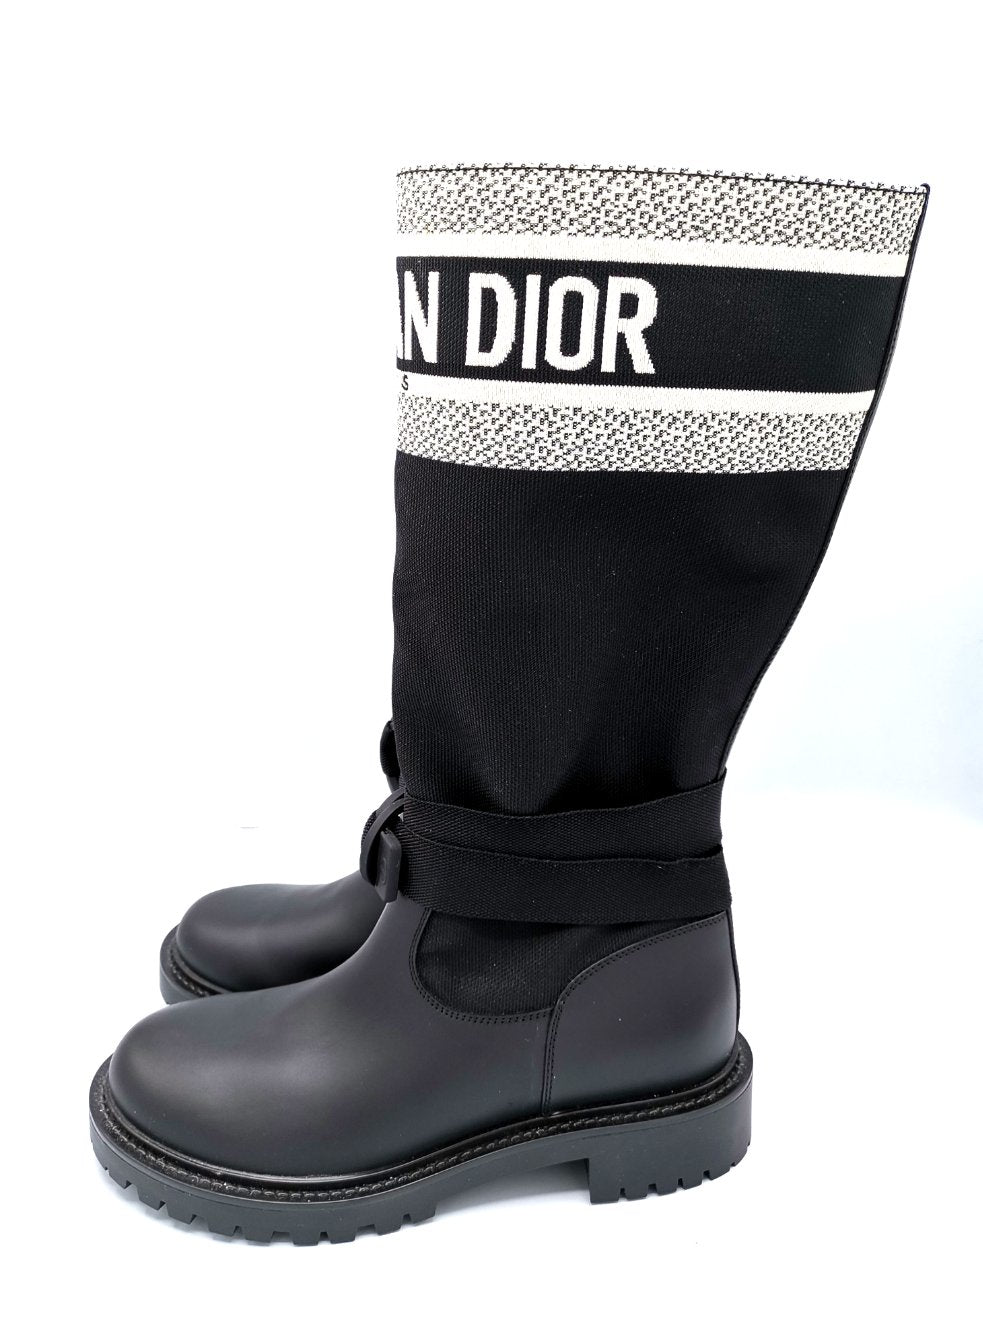 DIOR D-Major boots size 36 current collection RRP £1250